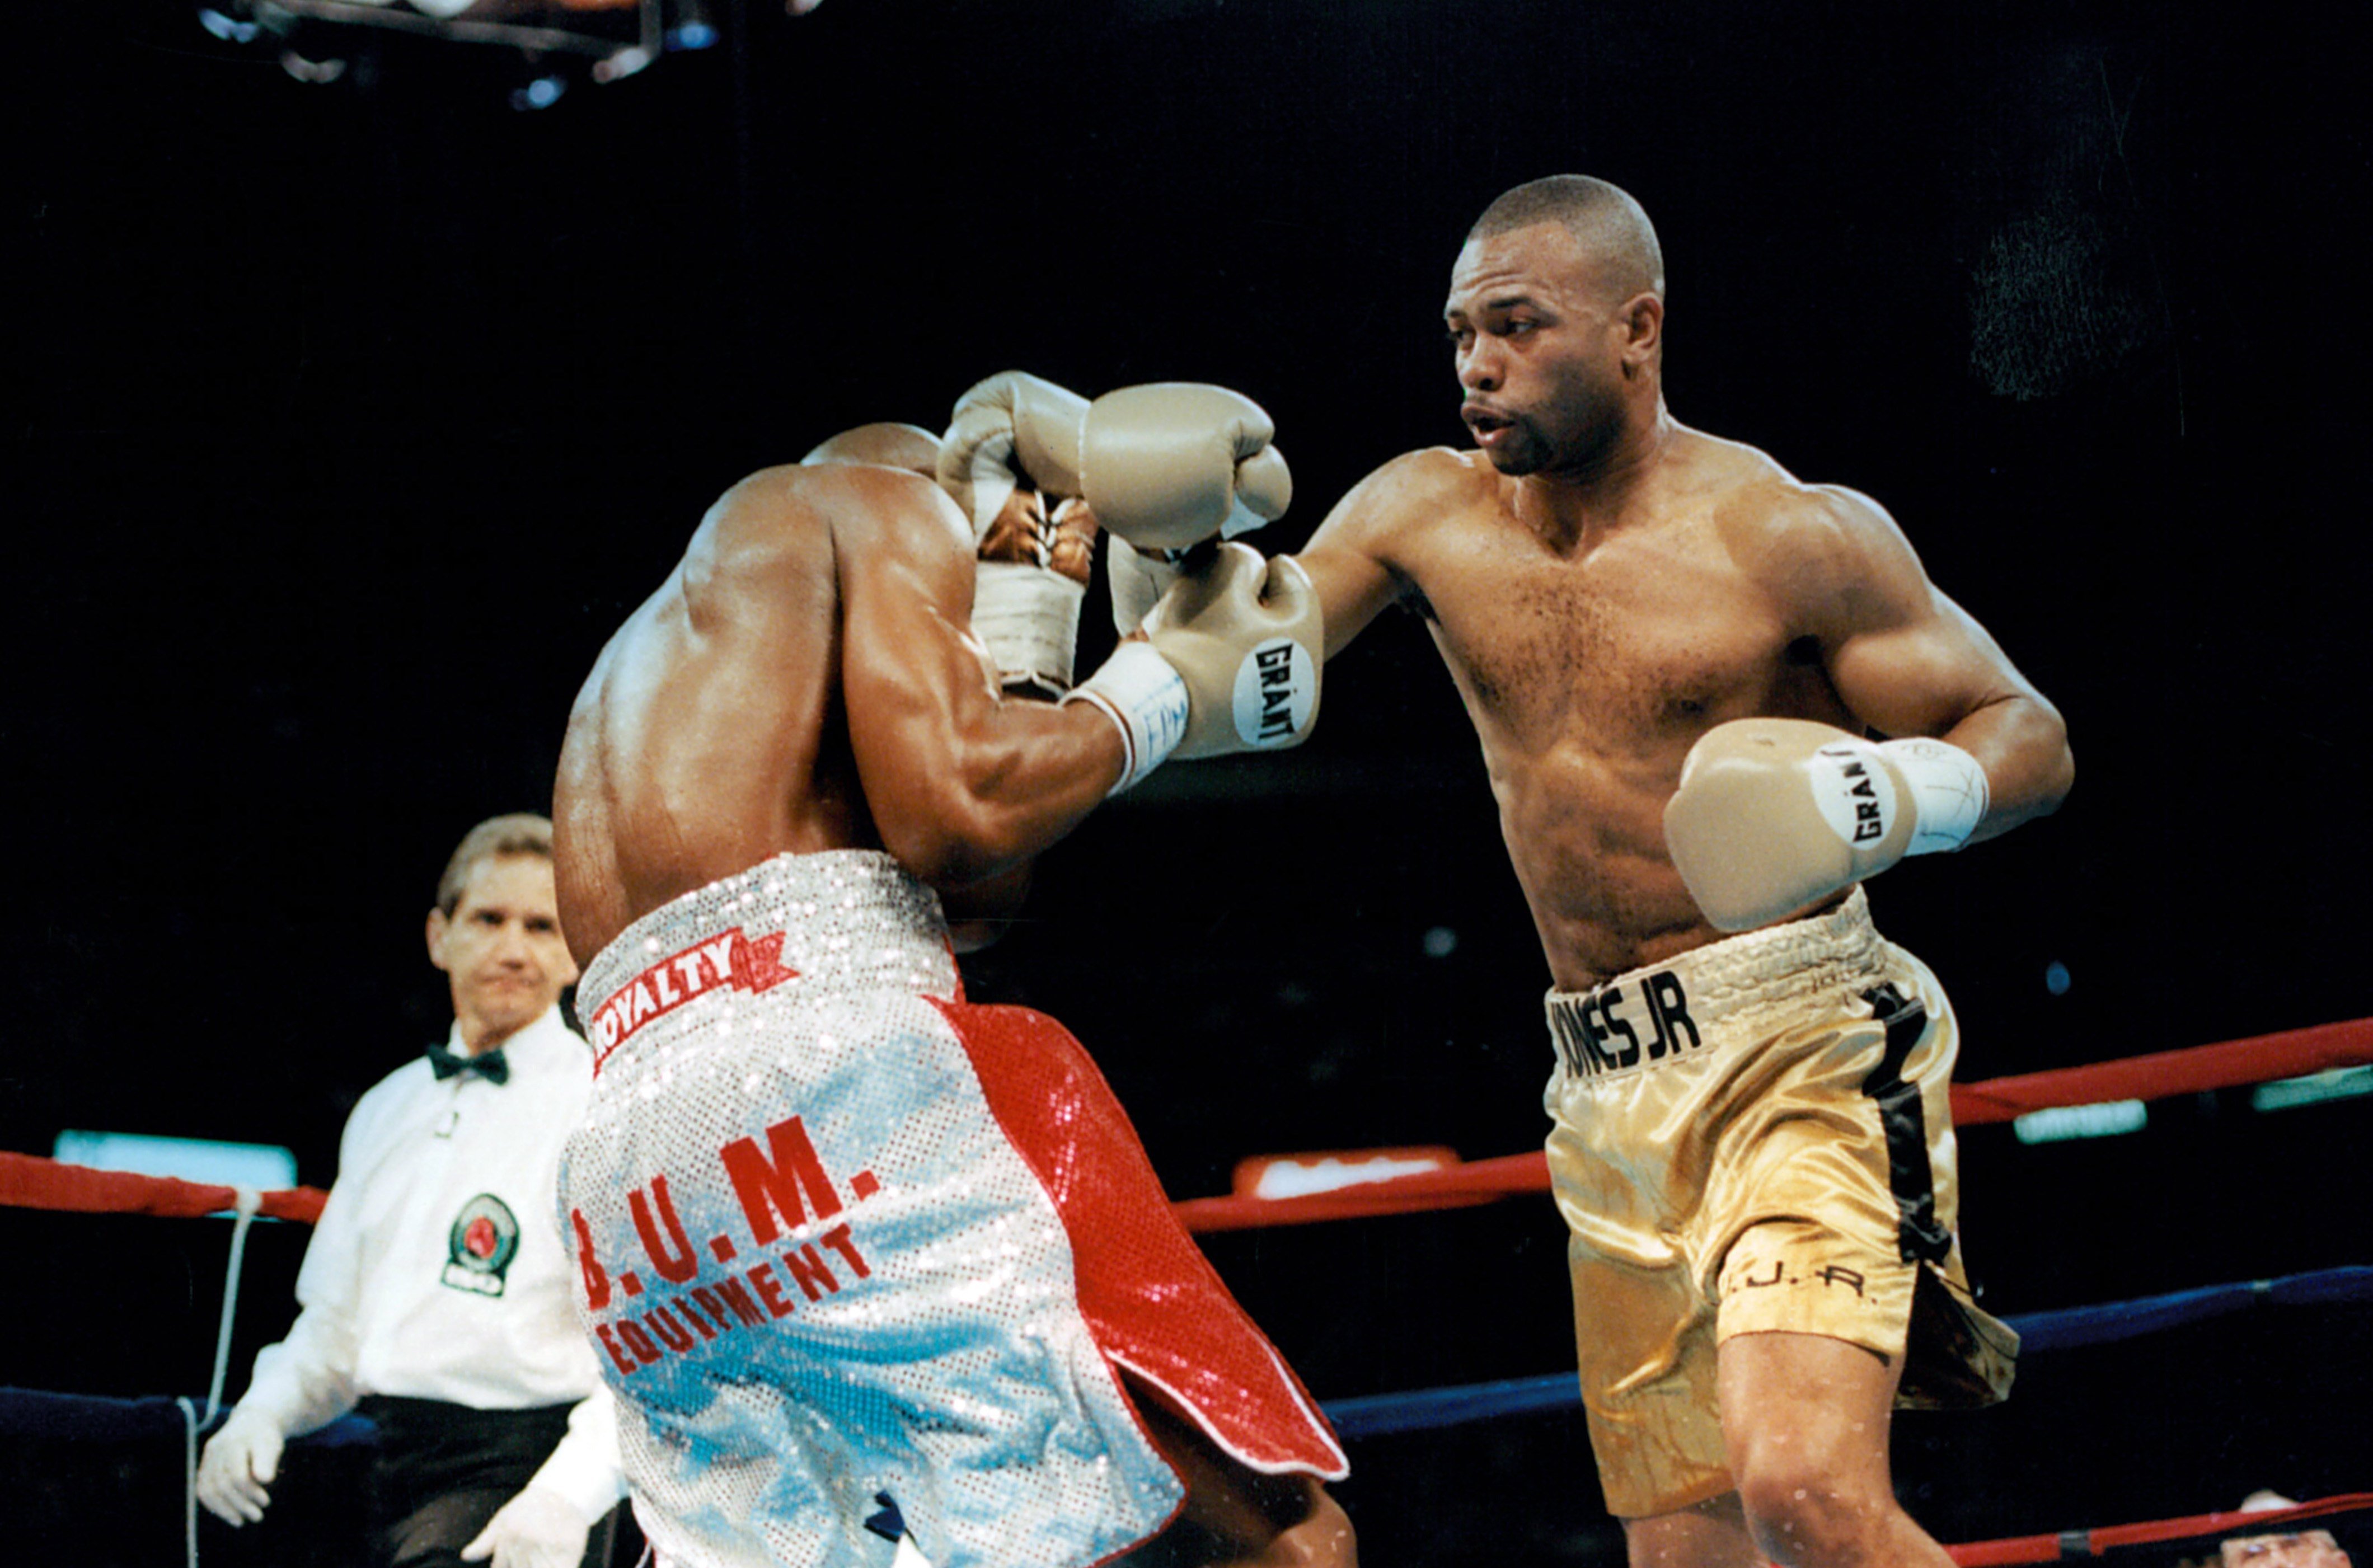 Roy Jones Provided The Kind Of Boxing Ending He Wanted